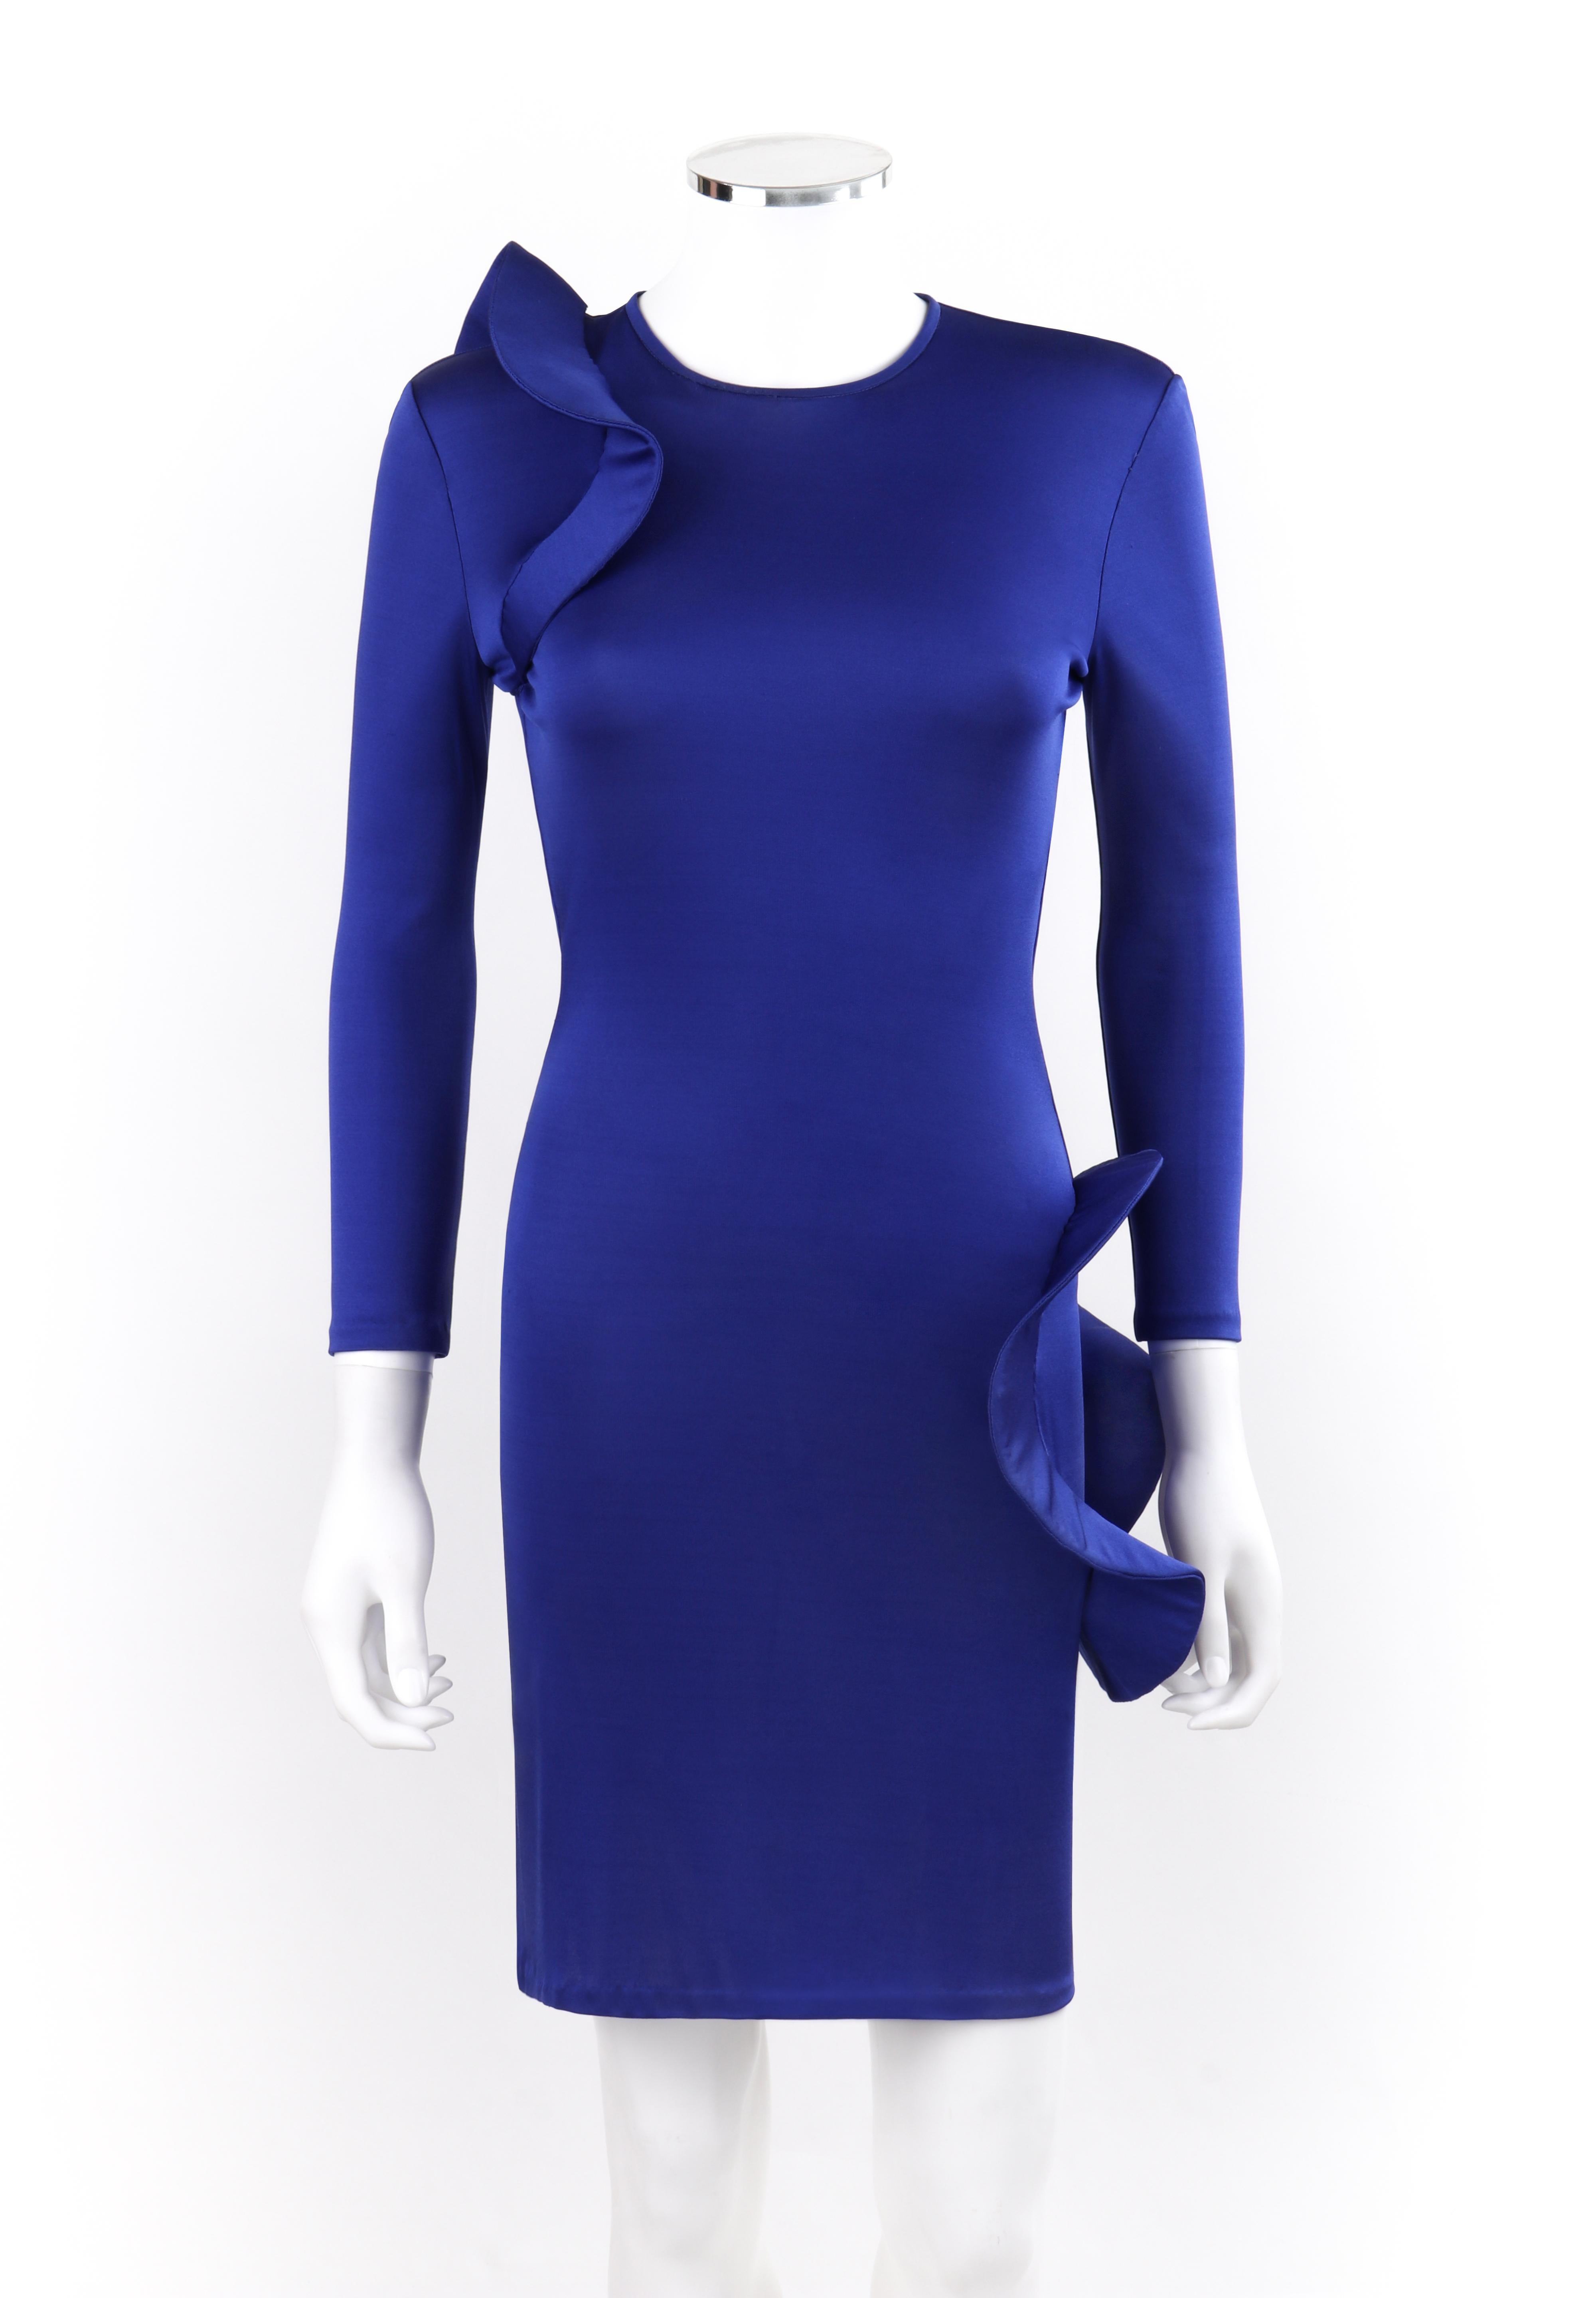 ALEXANDER McQUEEN  c.2010 Royal Blue Structured Ruffle Bodycon Dress 
(one of a kind sample - not placed into production)
 
Brand / Manufacturer: Alexander McQueen
Collection: S/S 2010
Style: Structured ruffle dress
Color(s): Royal blue
Lined: